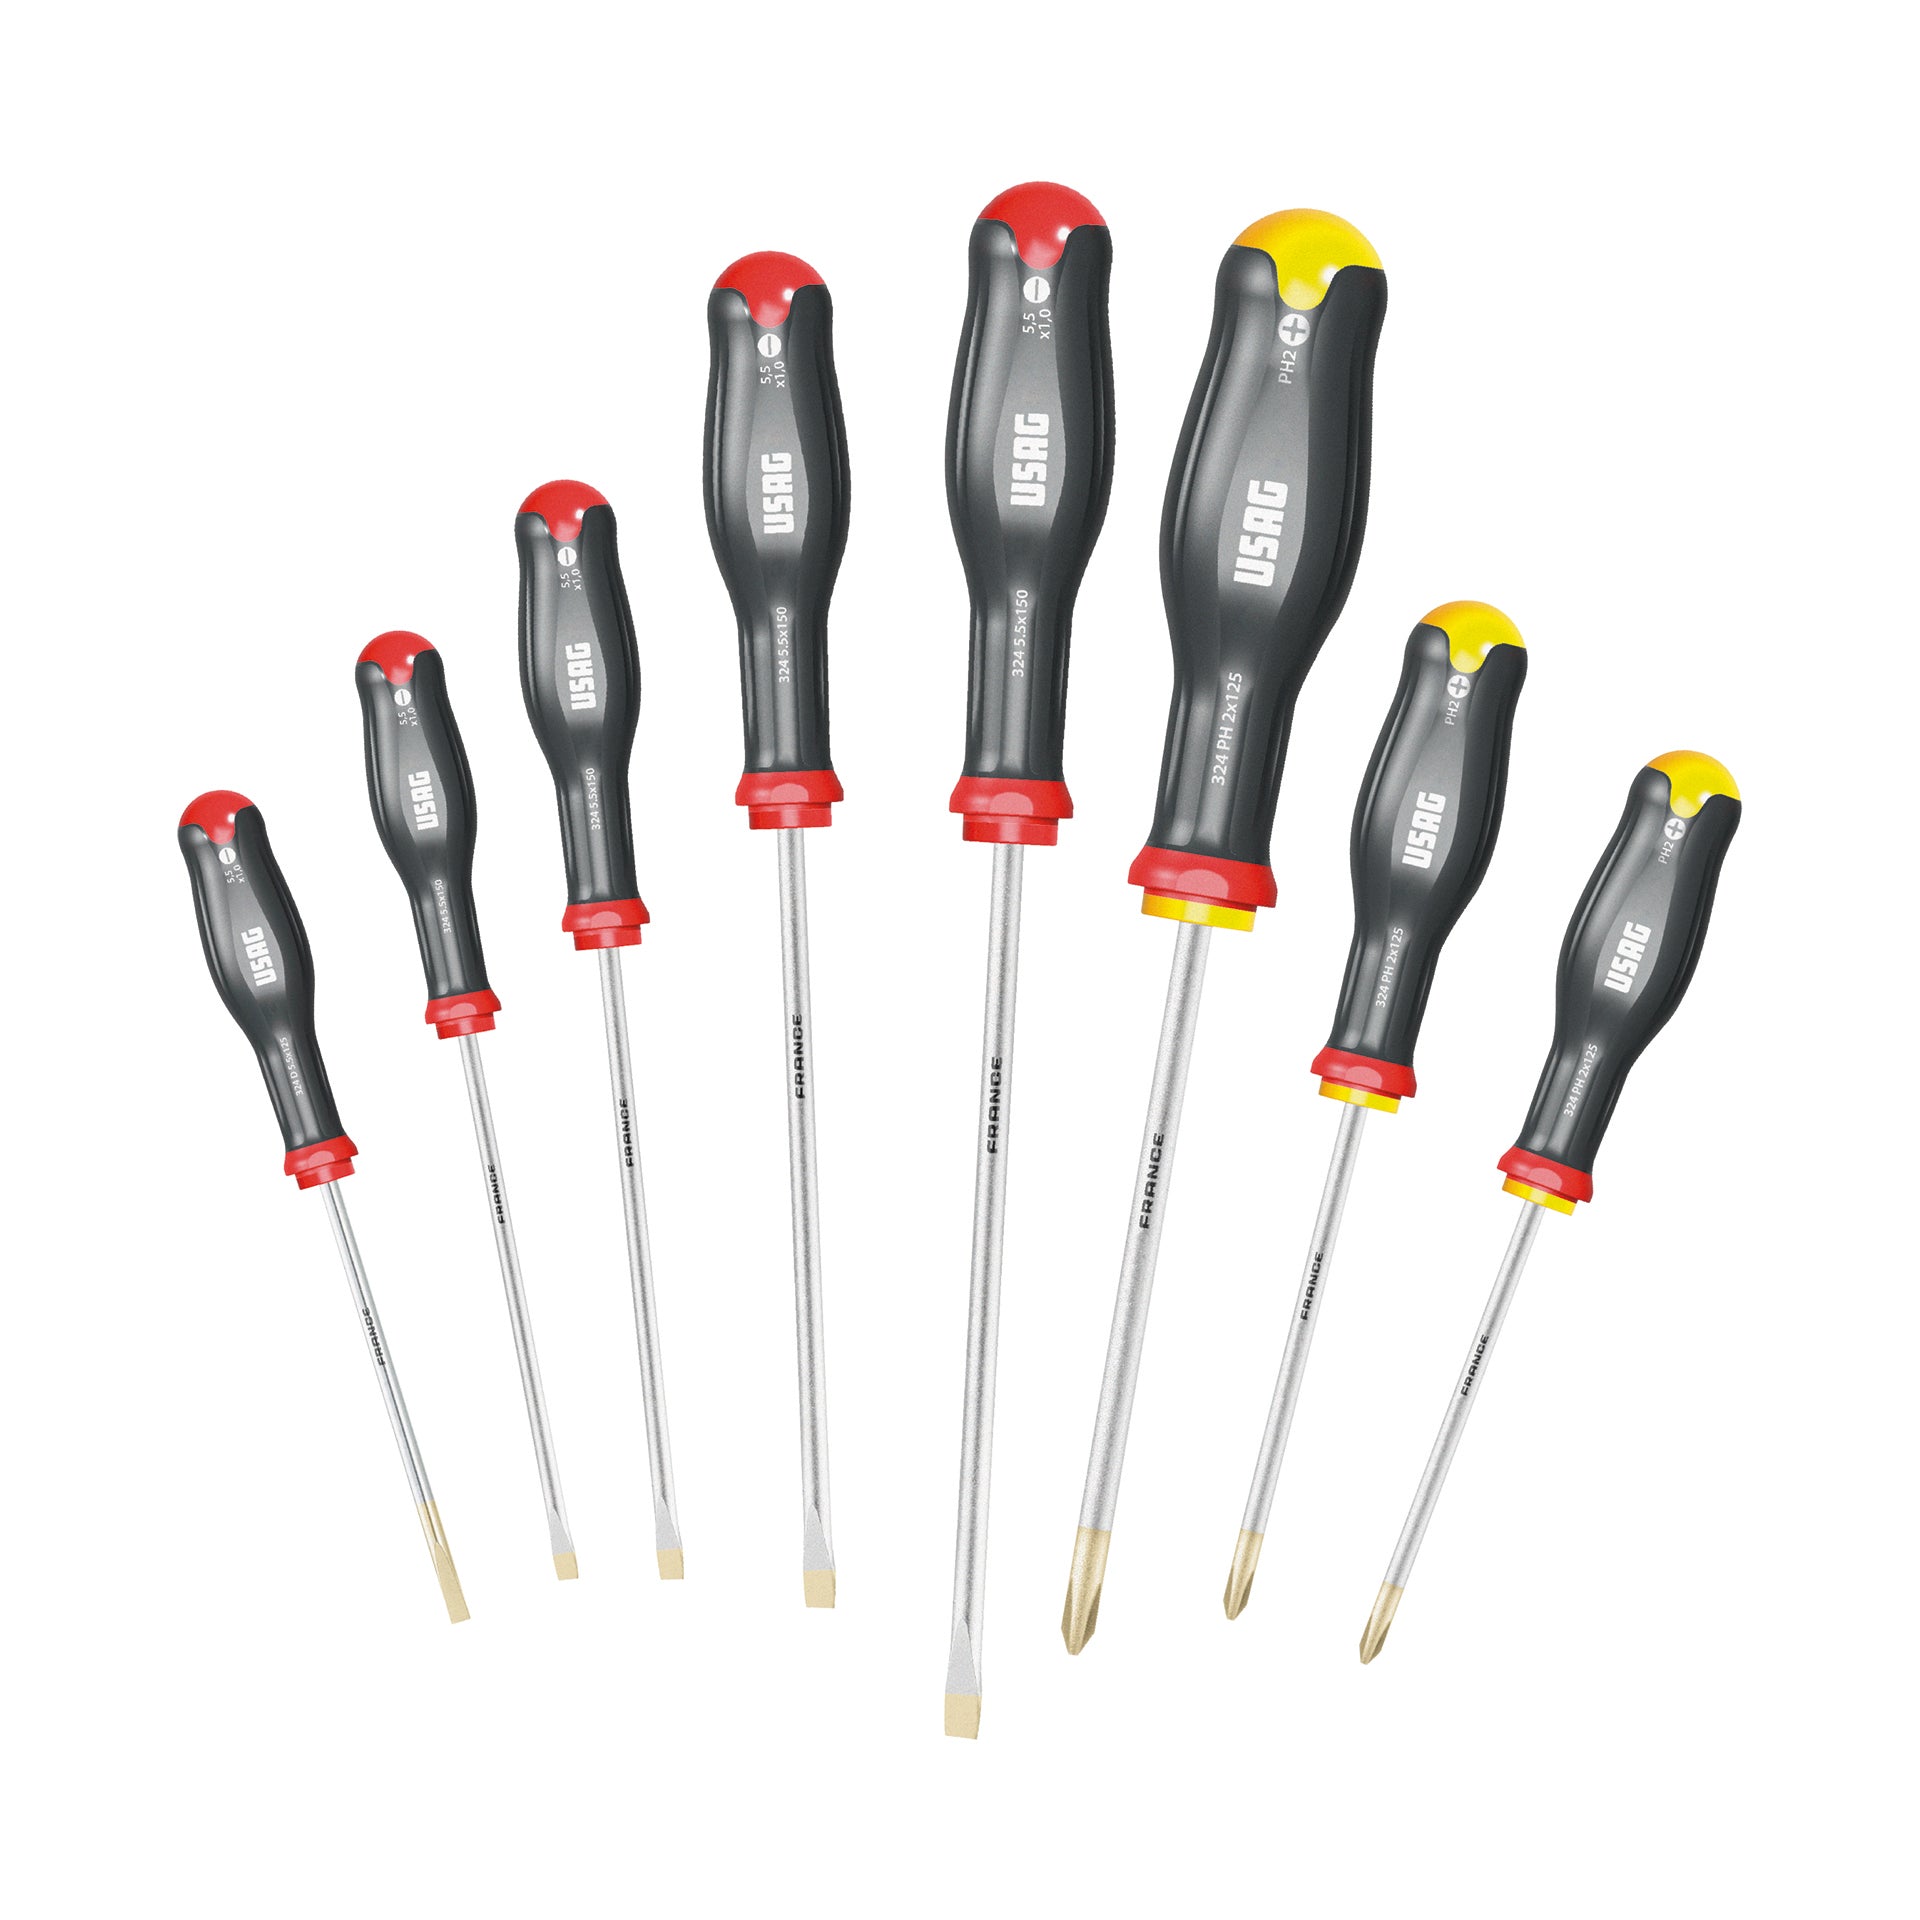 Set of 8 screwdrivers for slot-head and Phillips screws 640gr - Usag 324 SH8